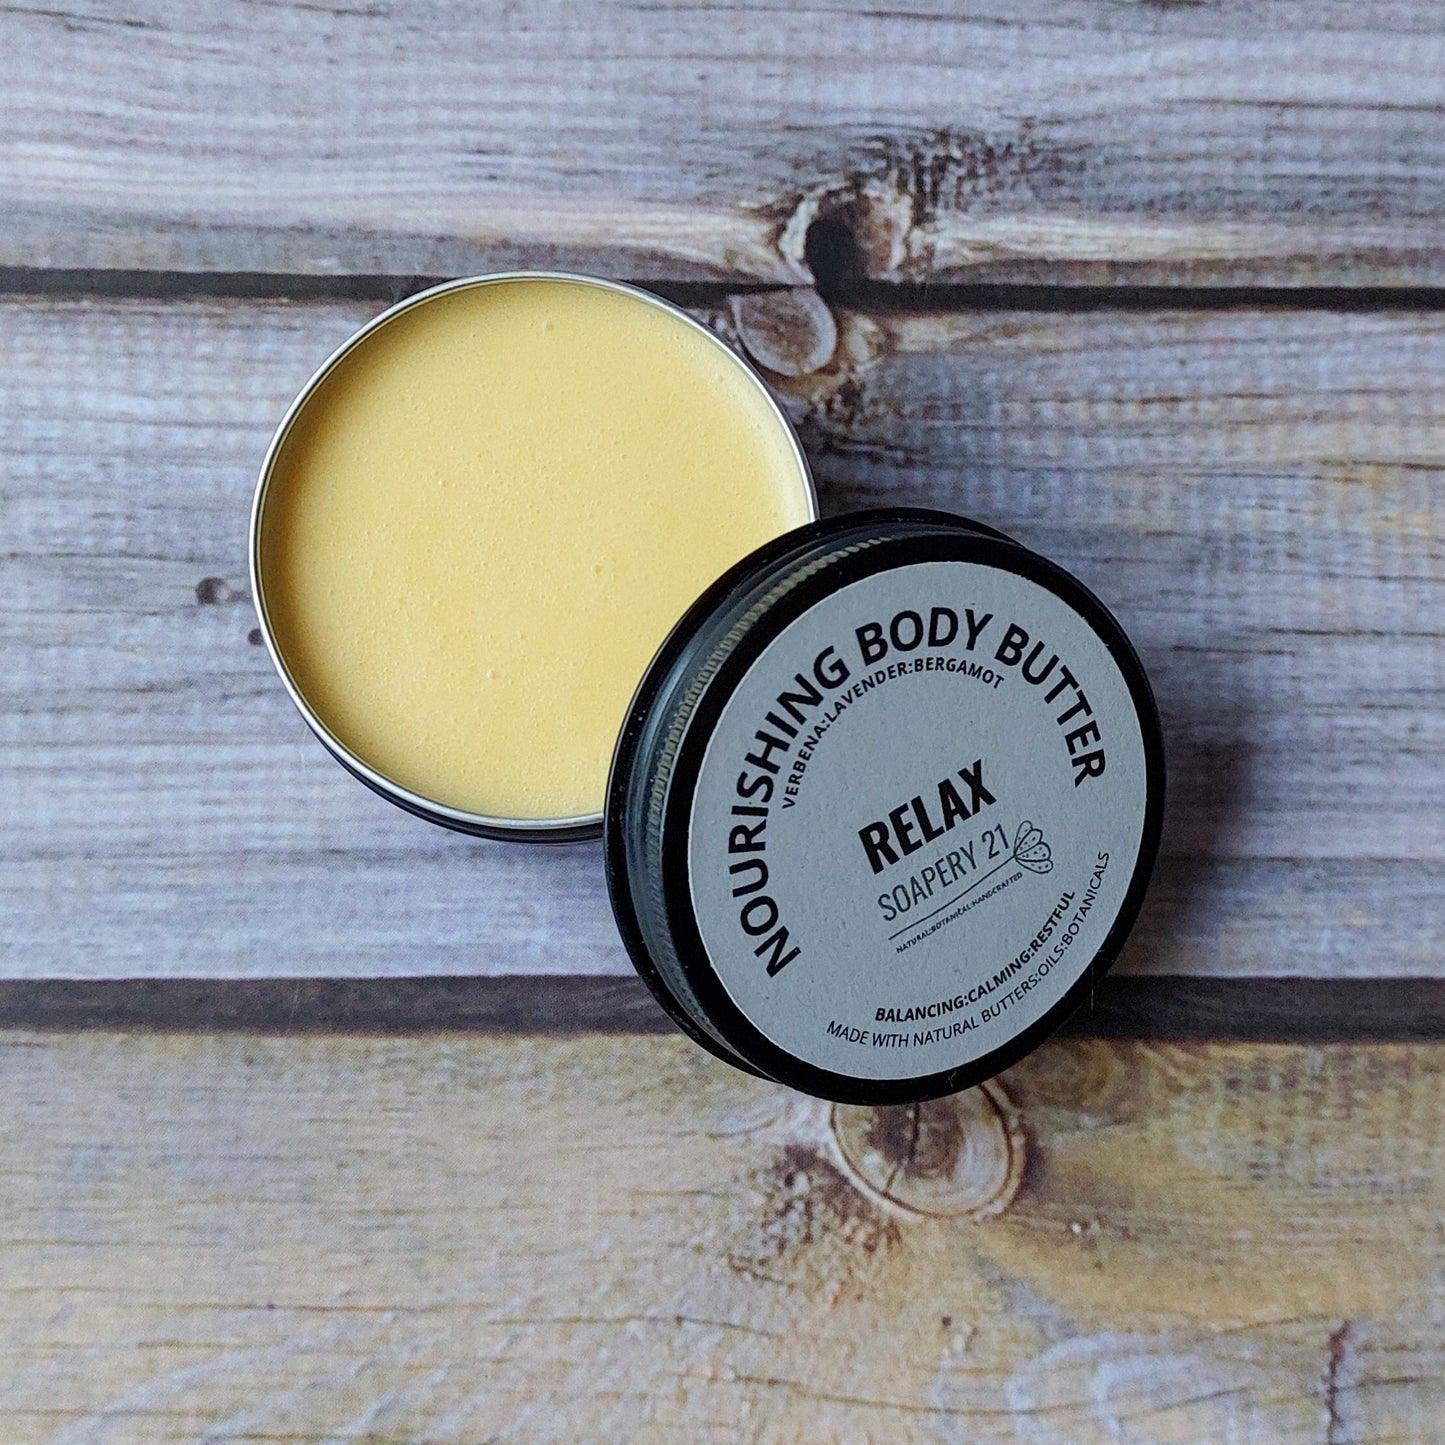 RELAX Body Butter Small